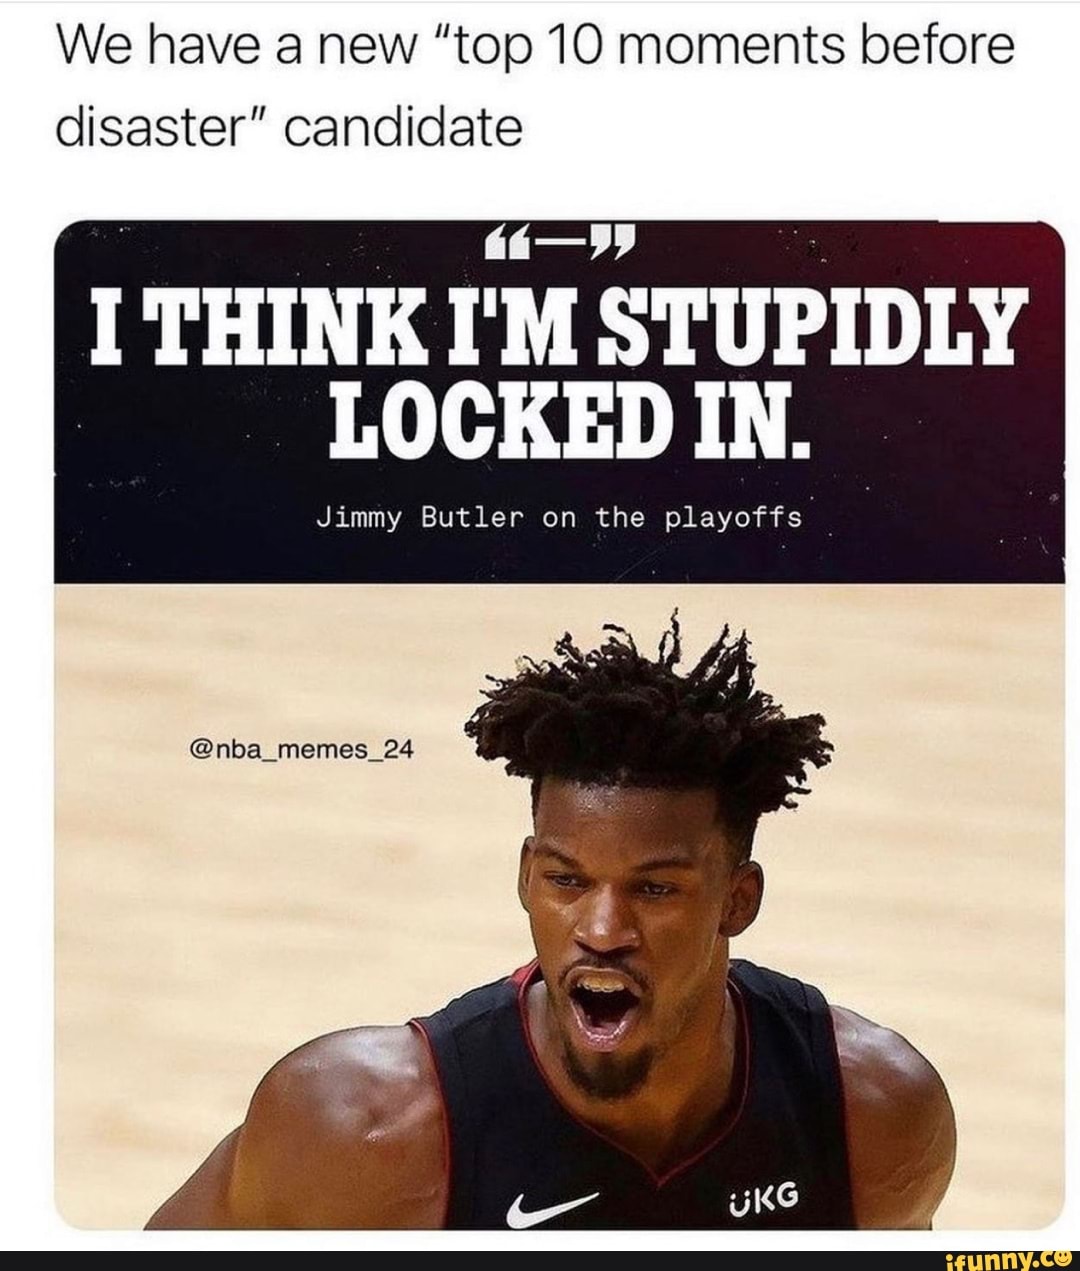 Jimmy Butler Might Want to Take Back His Old Comments After Embarrassing  Playoff Flop: 'I'm Stupidly Locked In